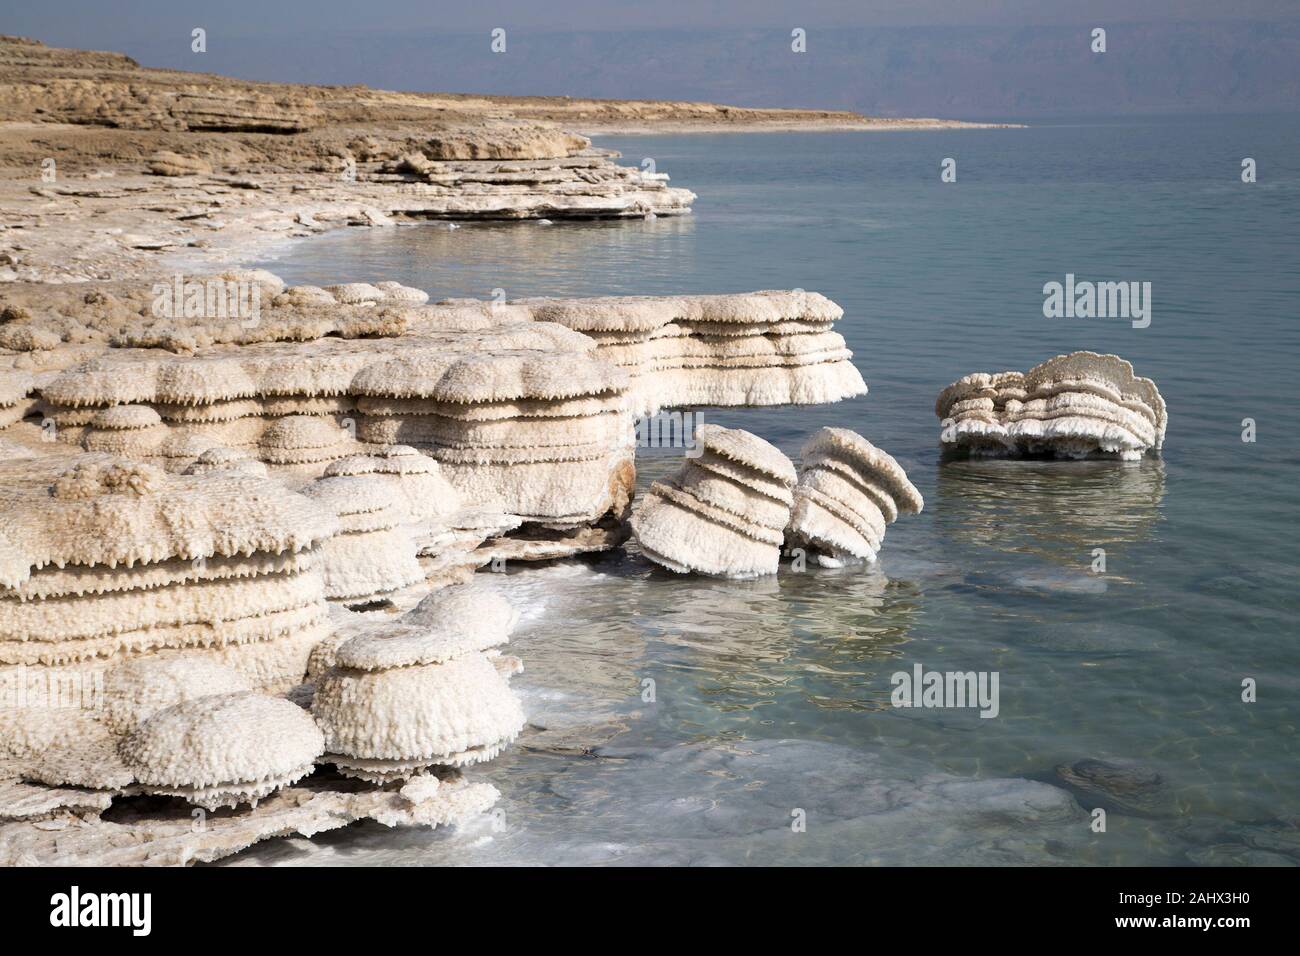 Dead Sea shoreline with salt chimneys. The salt formations develop where fresh water flows into the lake and are exposed as water levels drop, Israel Stock Photo